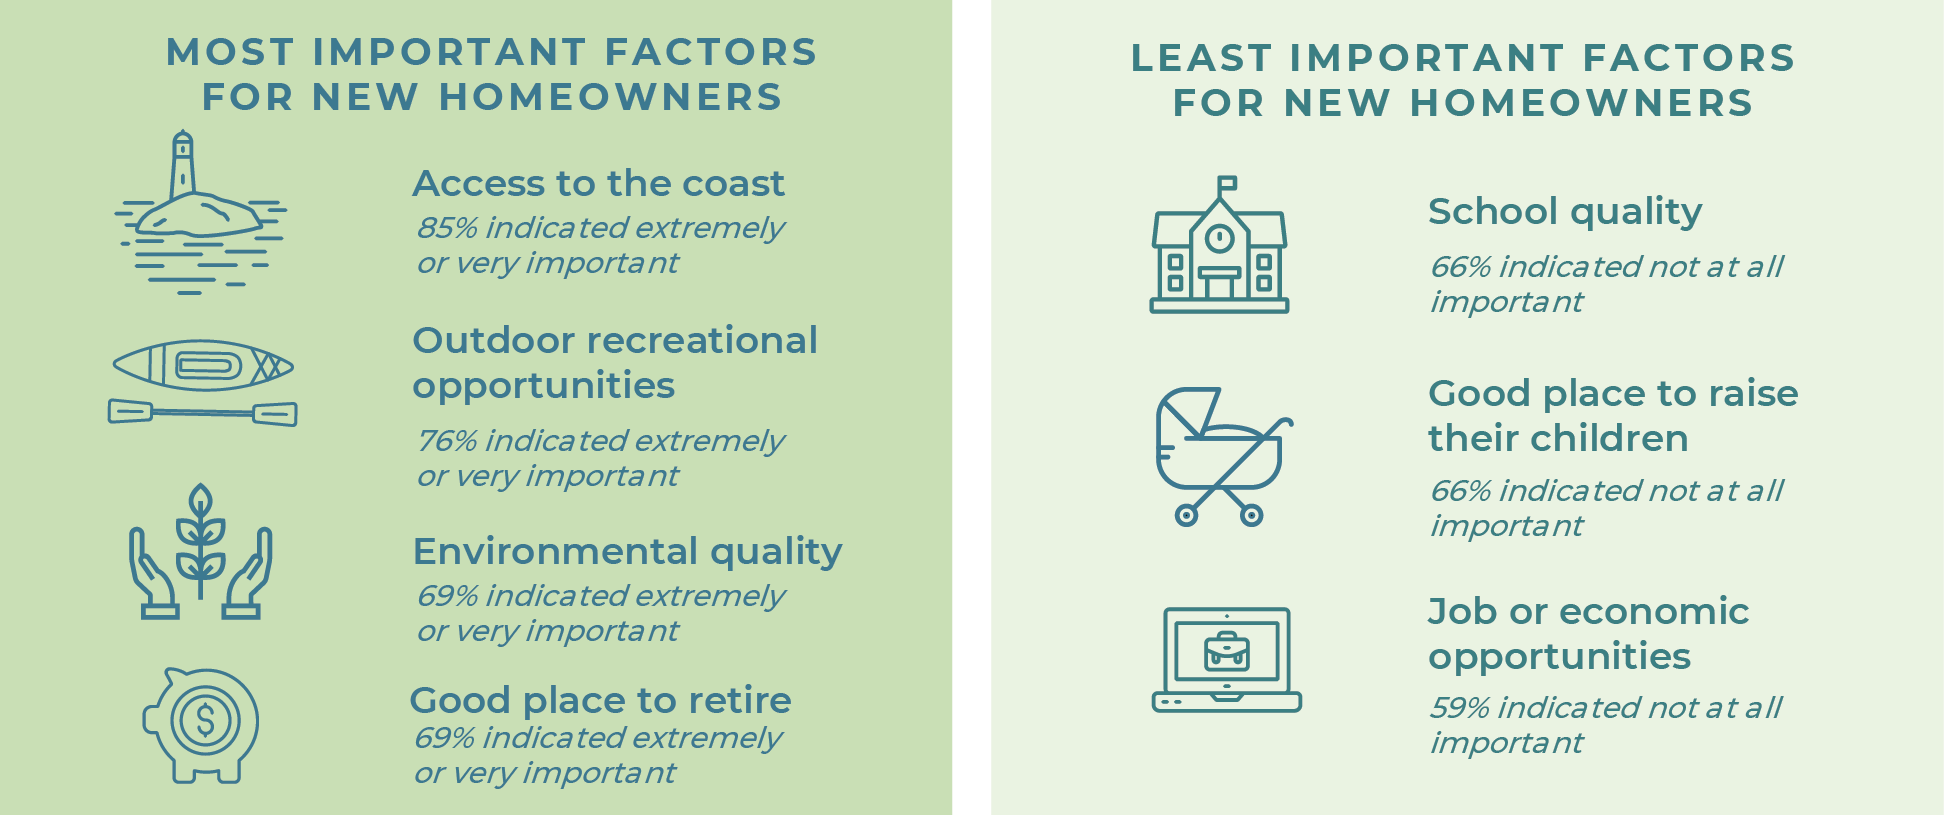 Graphic showing the most important (access to the coast, outdoor recreational opportunities, environmental quality) and least important (school quality, good place to raise children, job or economic opportunities) in deciding to purchase a home in the region